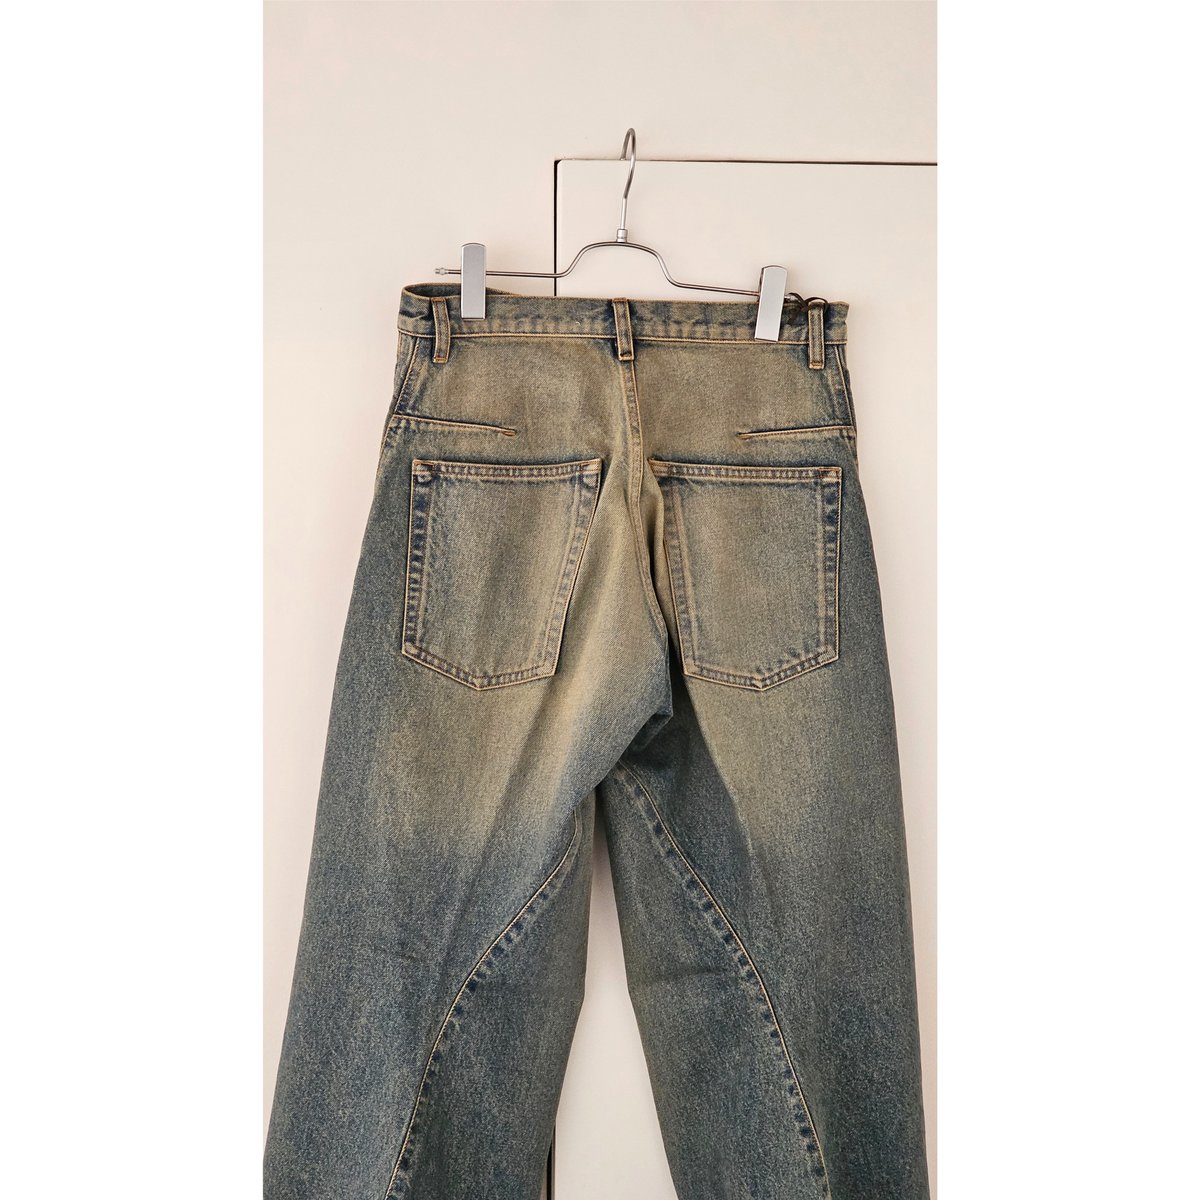 NVRFRGT / 3D TWISTED WIDE LEG JEANS *DIRTY FADE